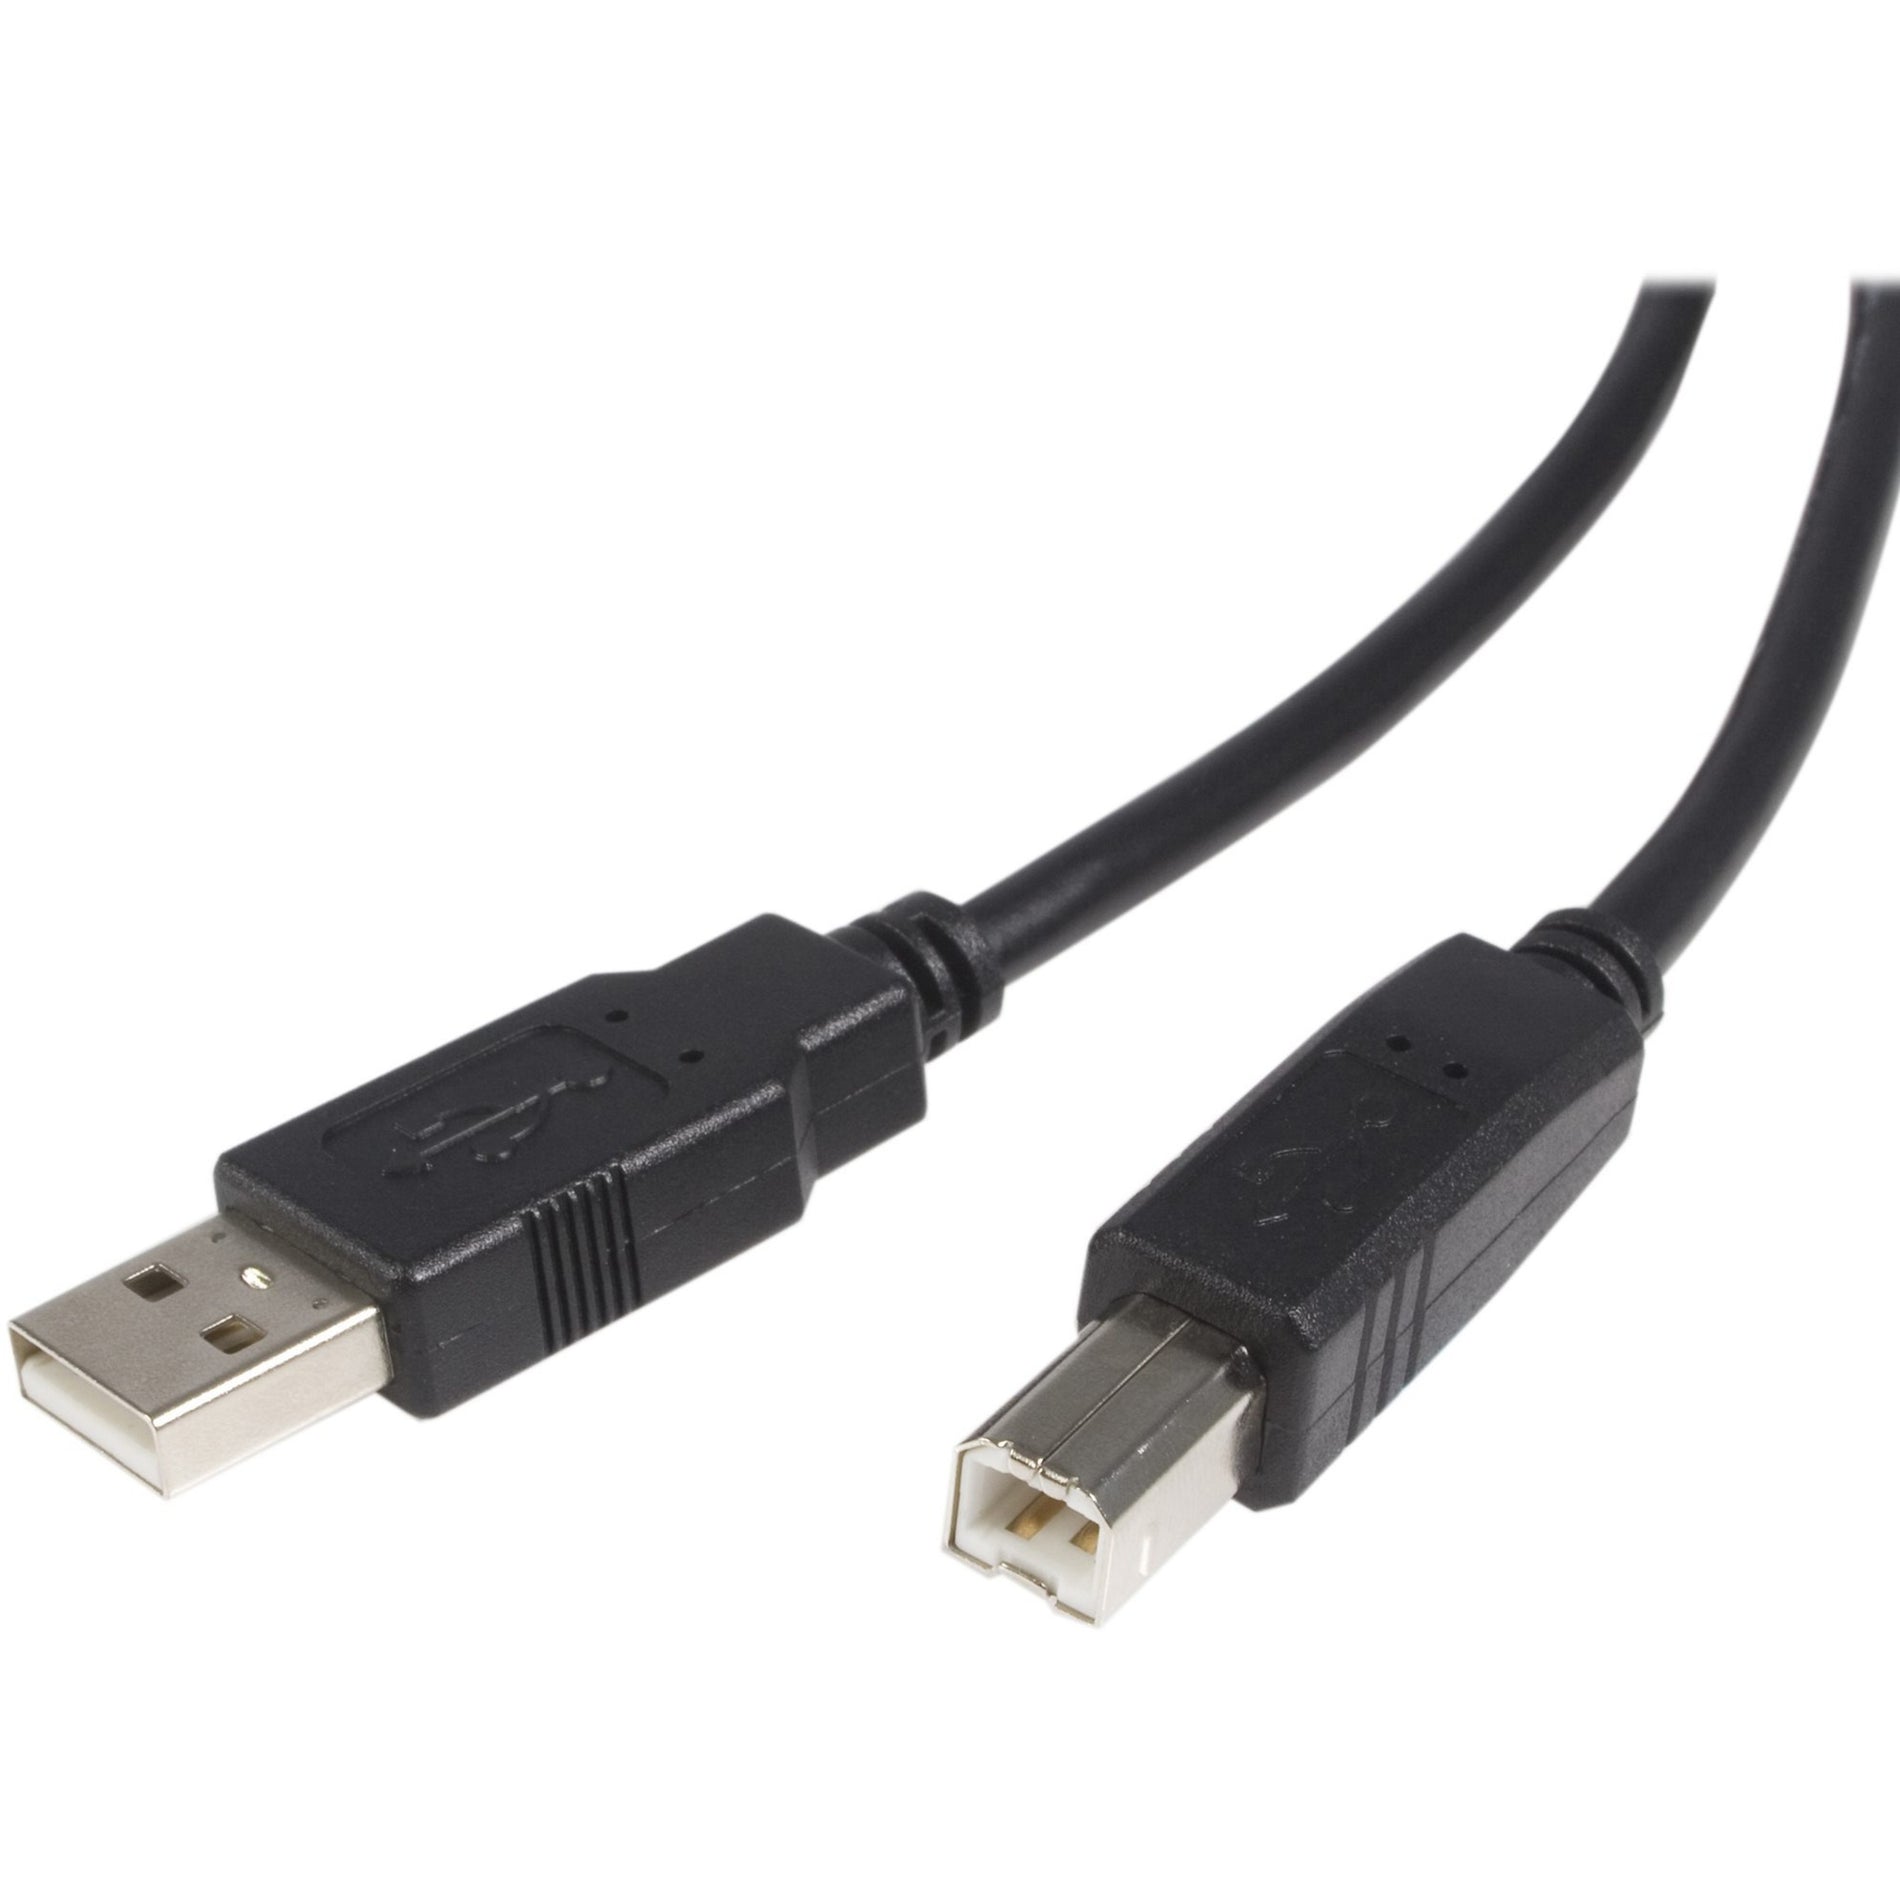 StarTech.com USB2HAB6 6 ft USB 2.0 Certified A to B Cable - M/M, Connect a USB printer or any USB peripheral device to a PC at high-performance data transfer speed